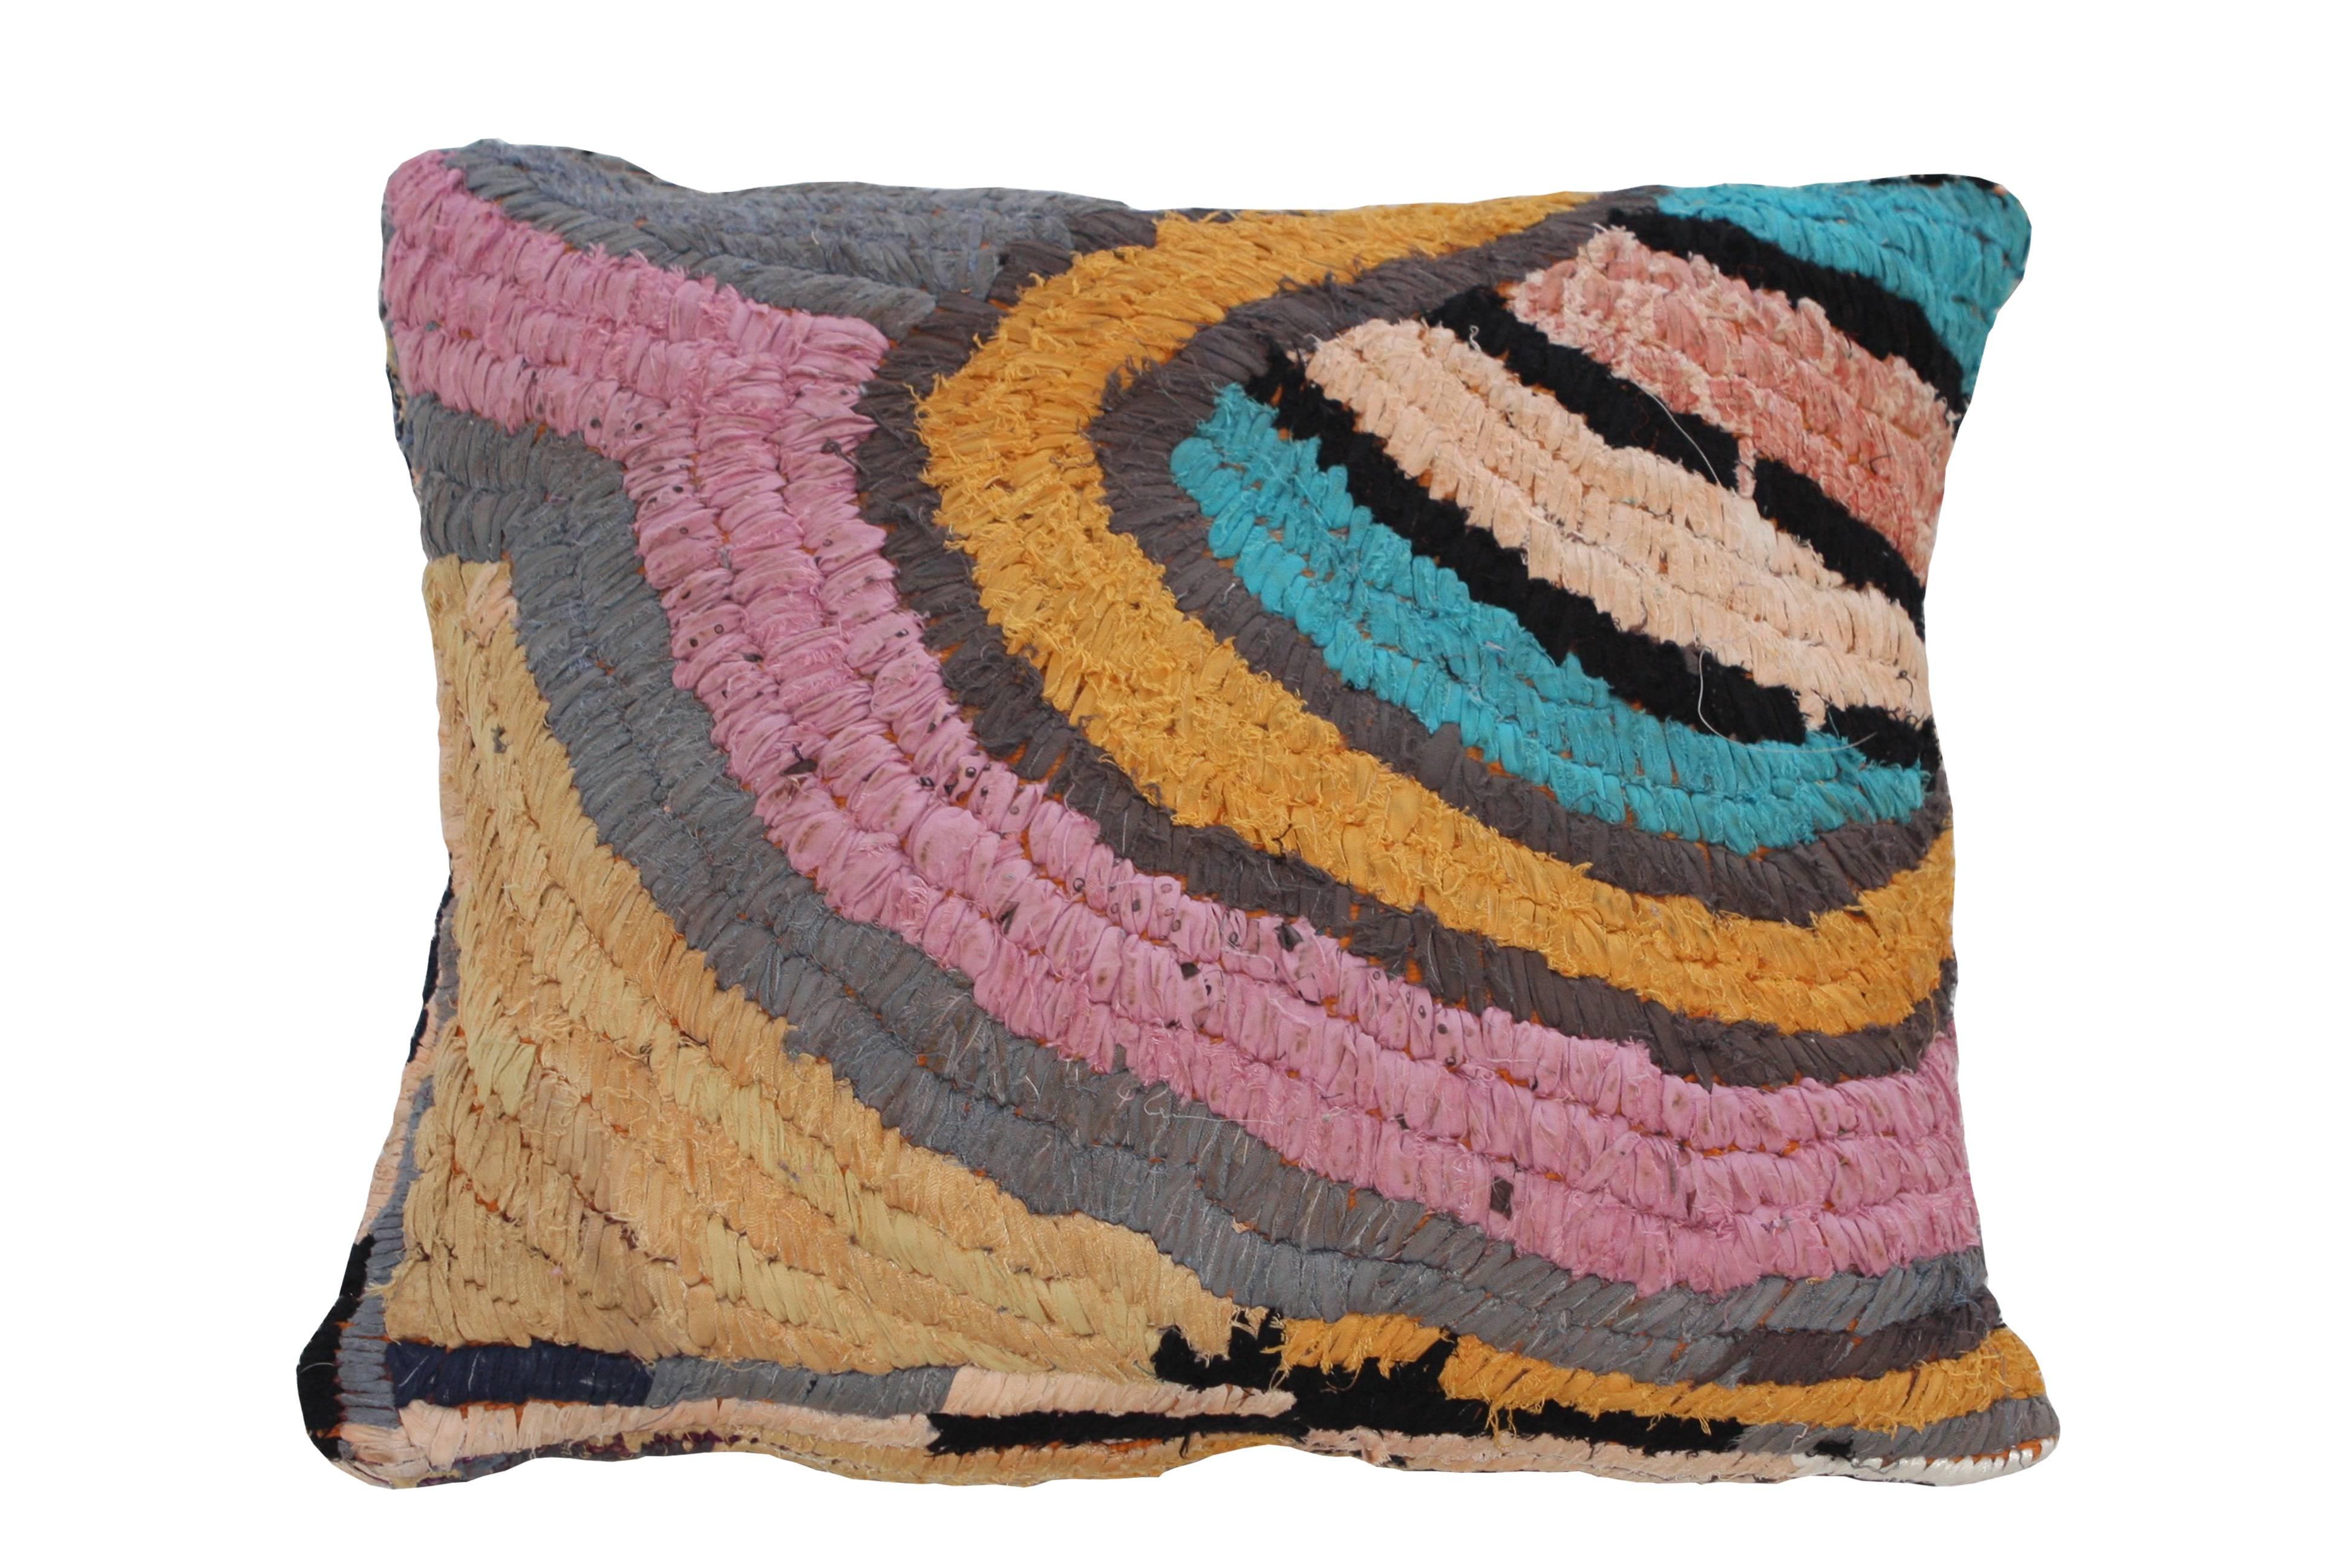 Floor pillow made with vintage Moroccan textile rug.
This pillow is orange and grey with accents in black, pink, aqua, and brown.
Measures: 28" L x 26" W.